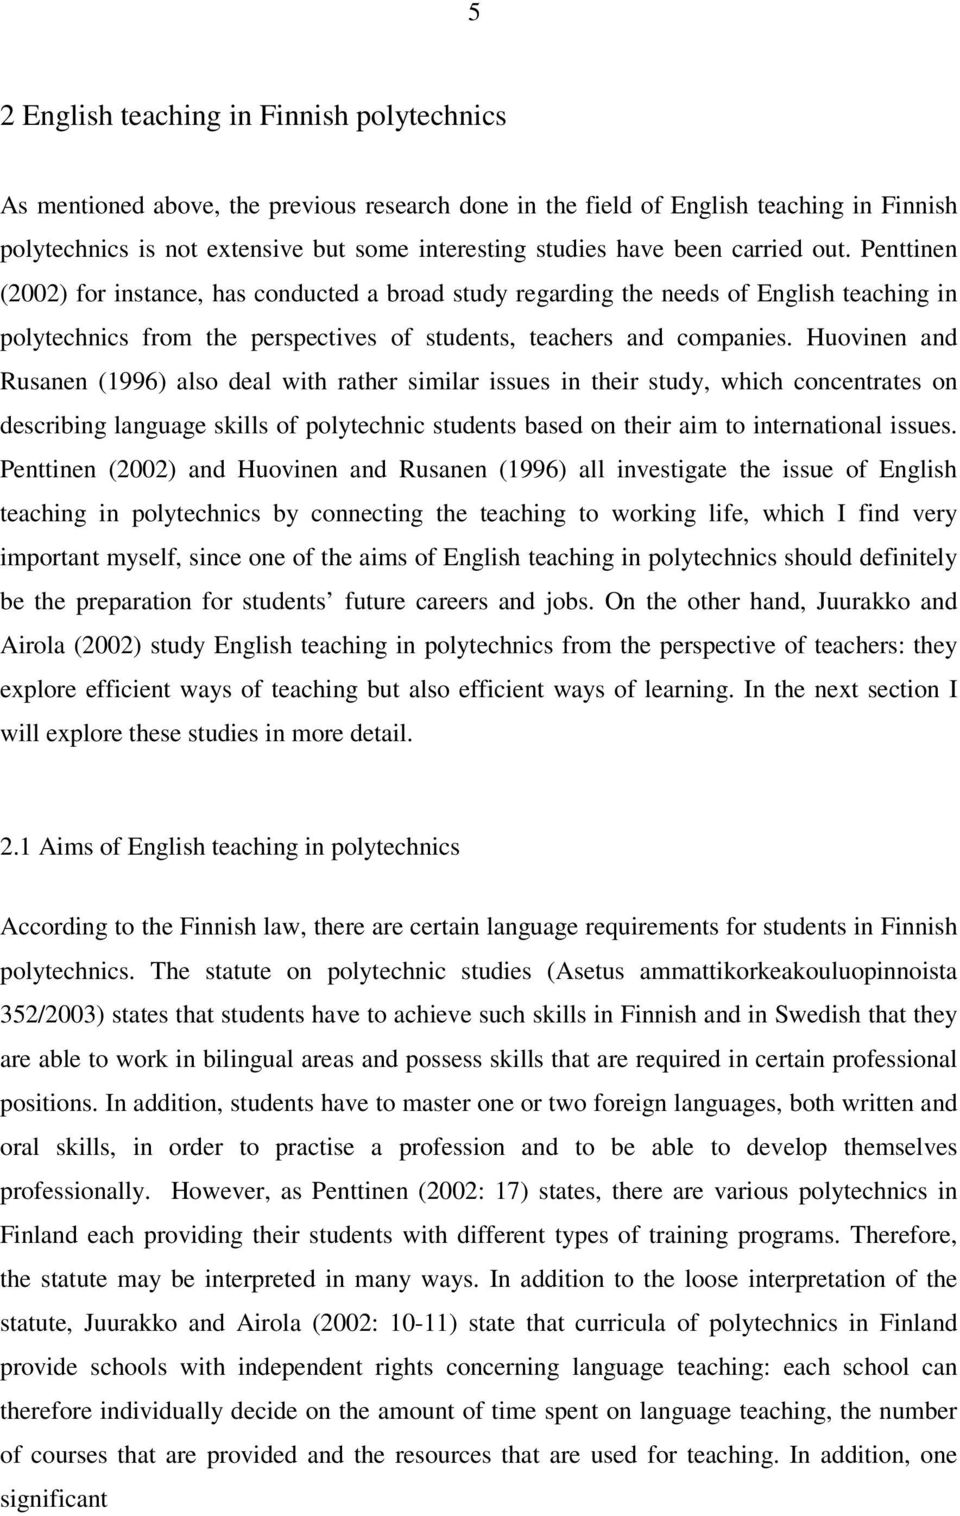 Huovinen and Rusanen (1996) also deal with rather similar issues in their study, which concentrates on describing language skills of polytechnic students based on their aim to international issues.